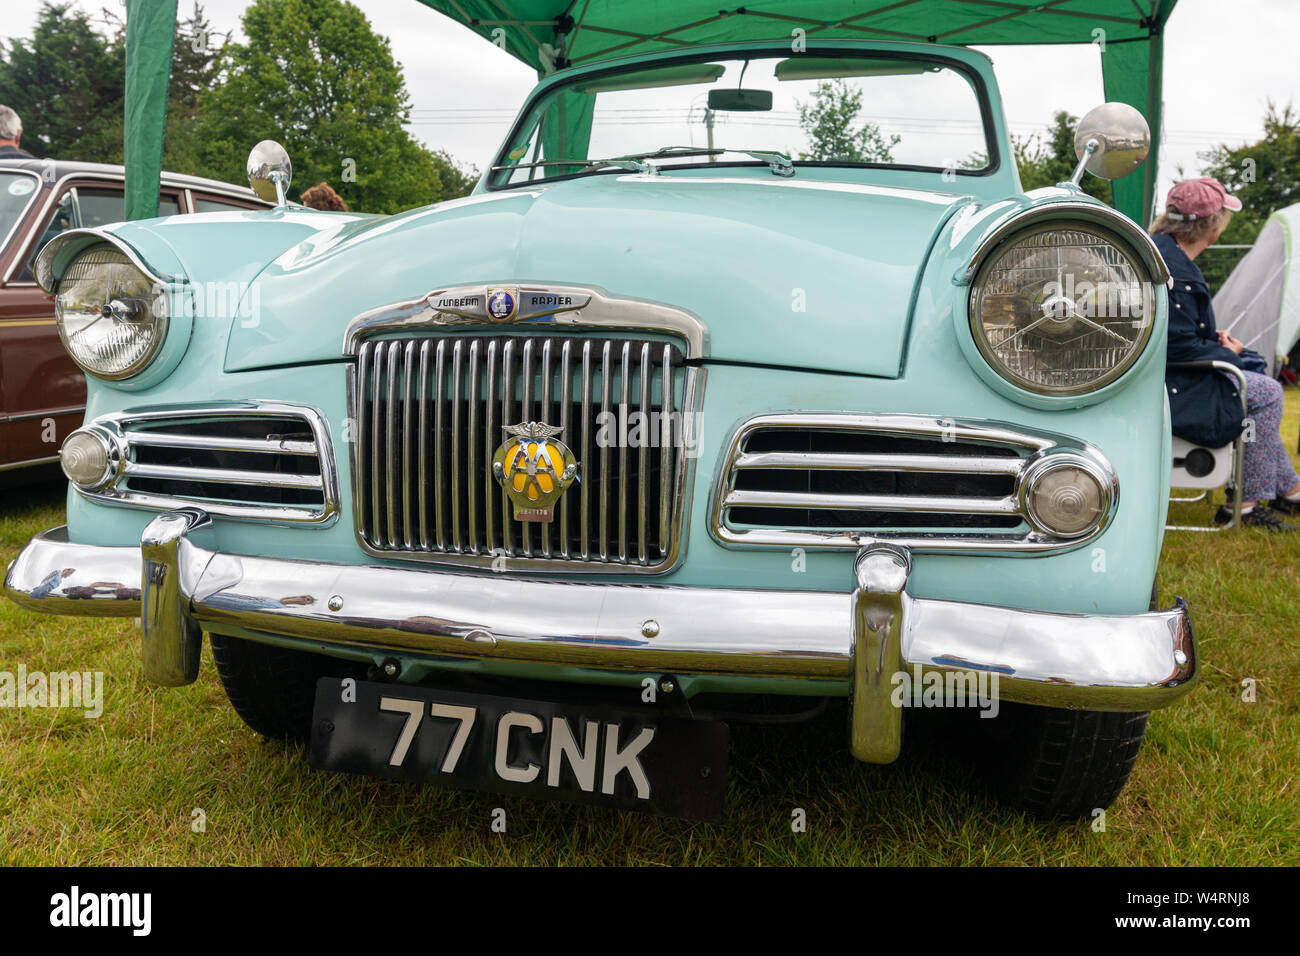 Sunbeam Rapier classic saloon car with an AA badge on the front at a summer fete, England, UK Stock Photo